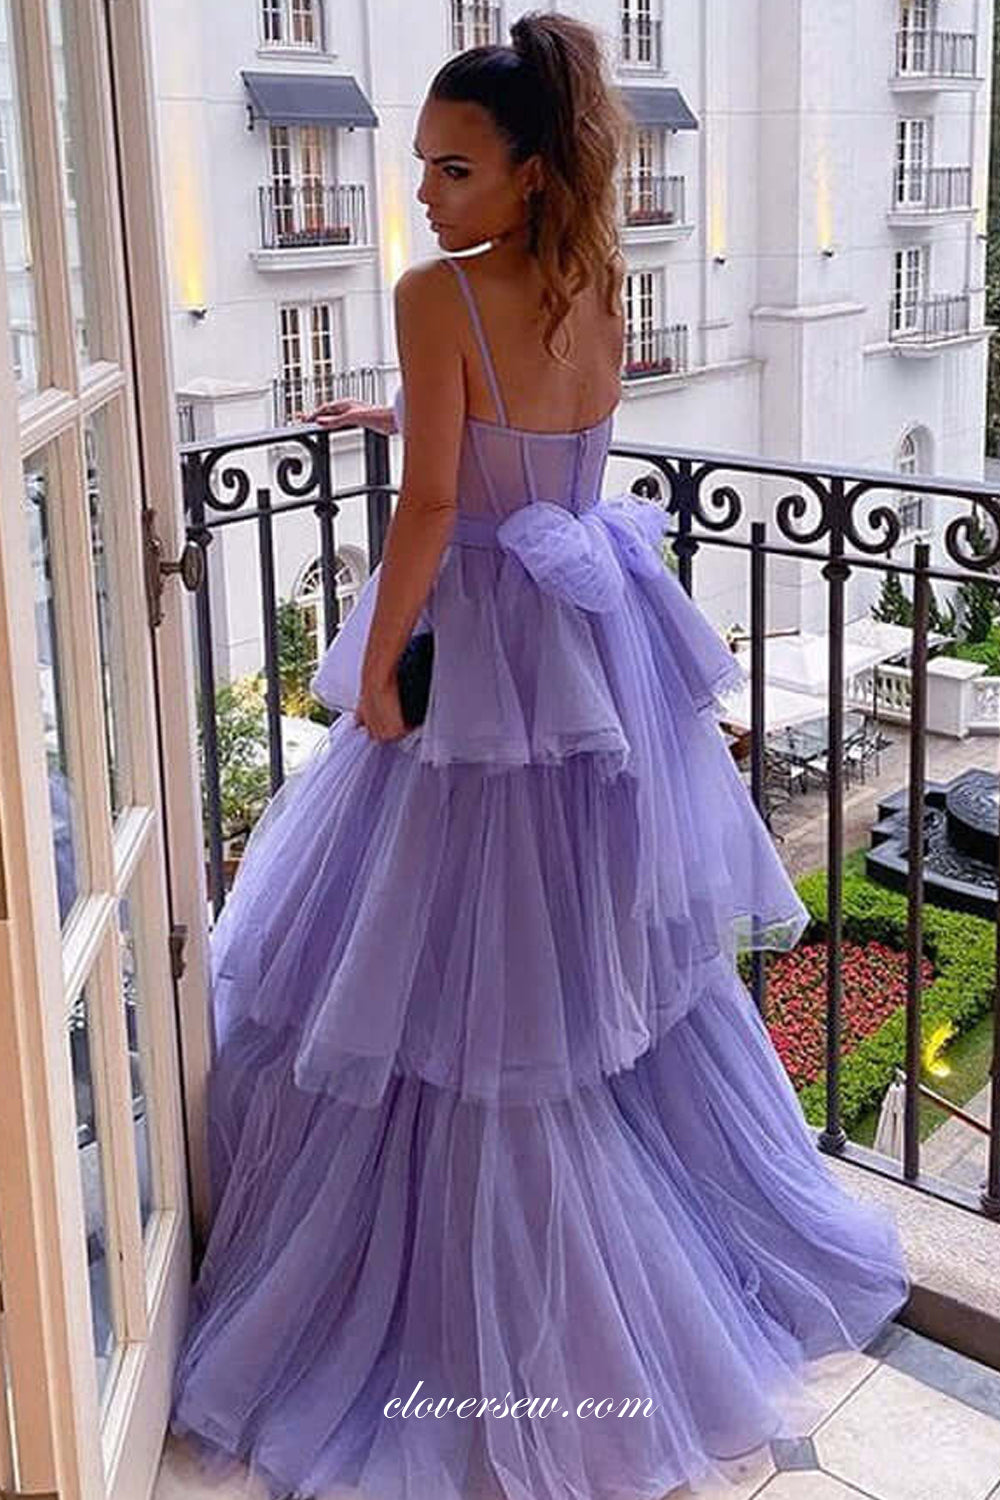 Lilac Tulle Tiered Spaghetti Strap Sweetheart Elegant Prom Dresses, CP –  clover sew